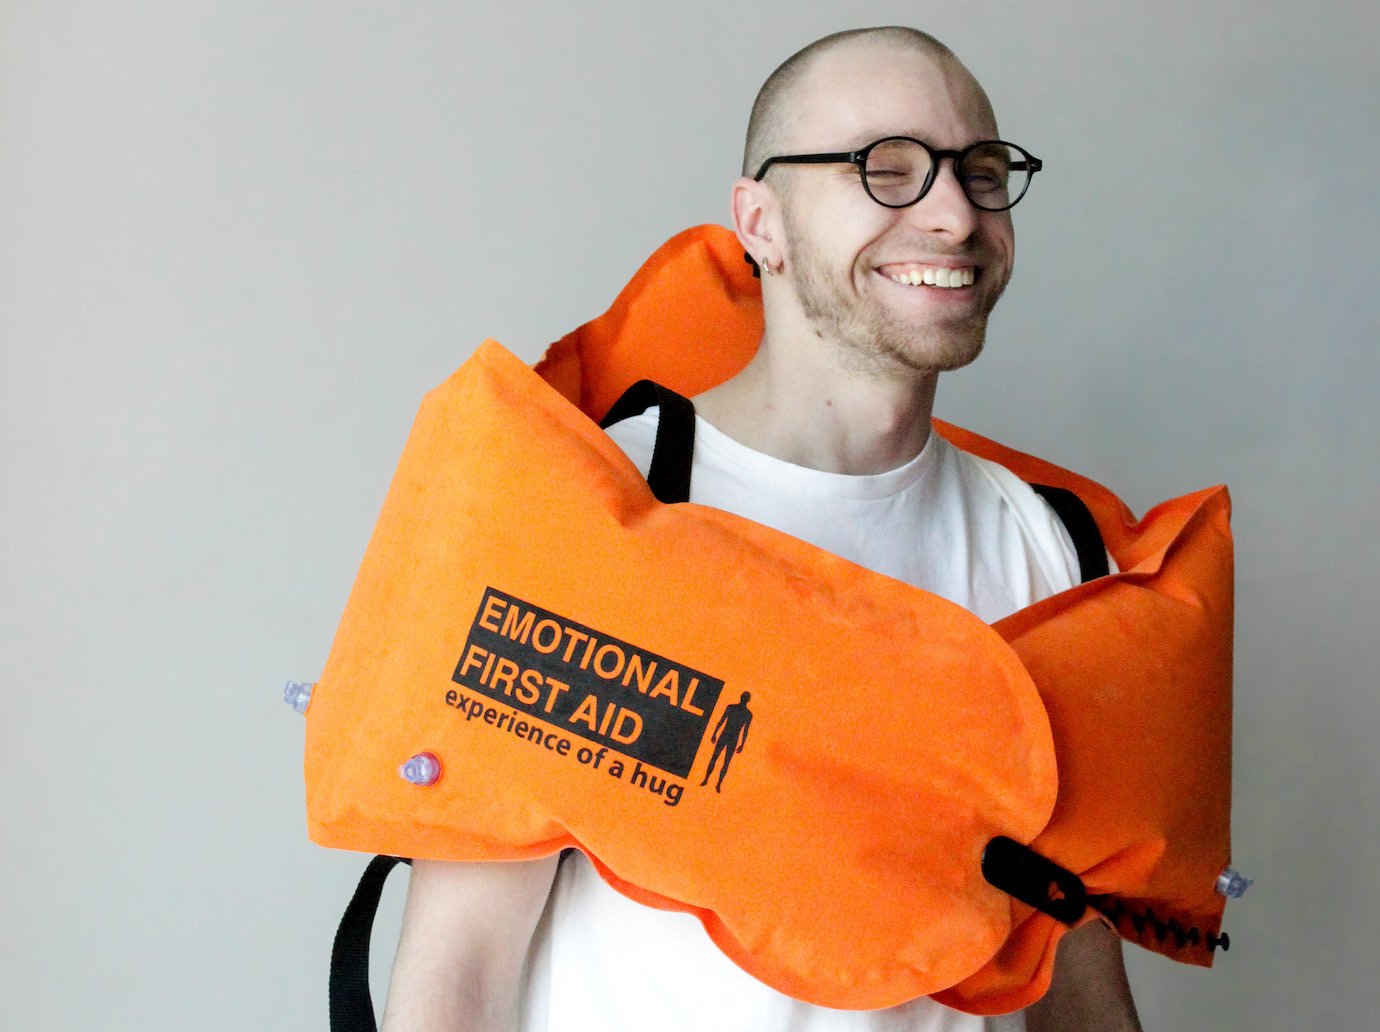 Emotional First Aid: this designer is recreating the experience of a hug